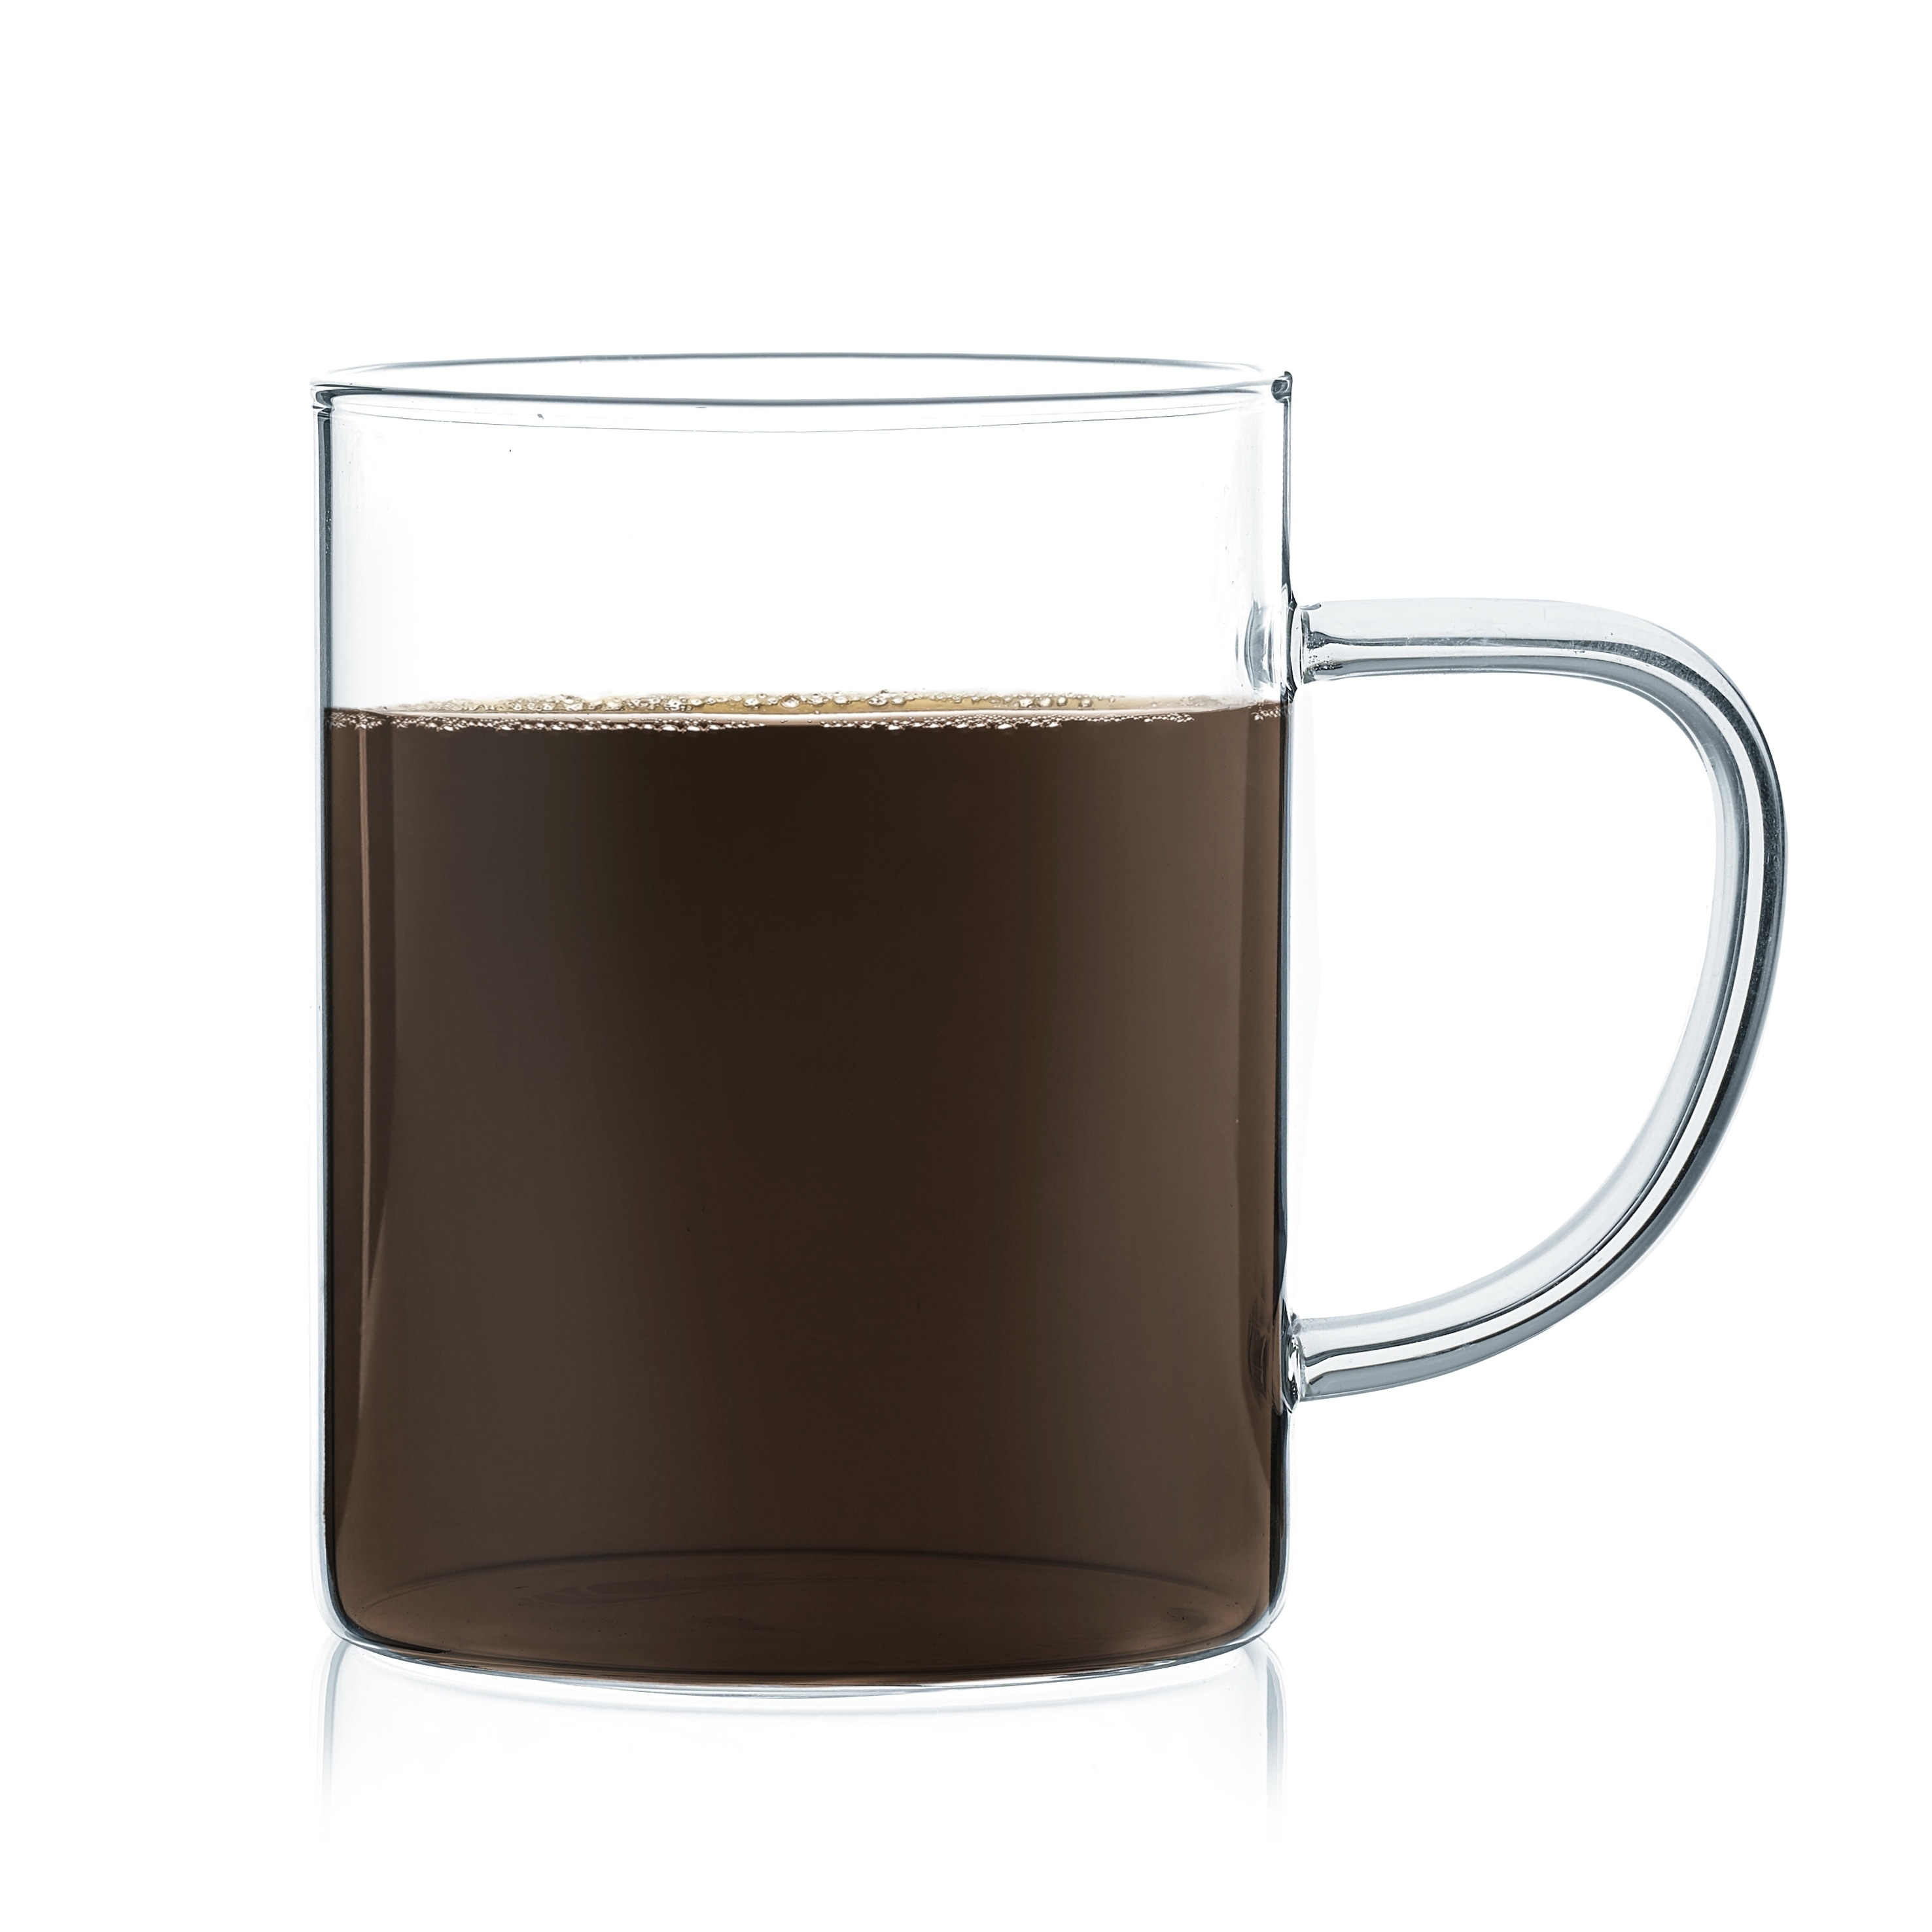 https://ak1.ostkcdn.com/images/products/29573077/JavaFly-Glass-Mug-Set-of-8-10.5-oz-c91630e2-8476-4b1e-b106-b1097b9e583d.jpg